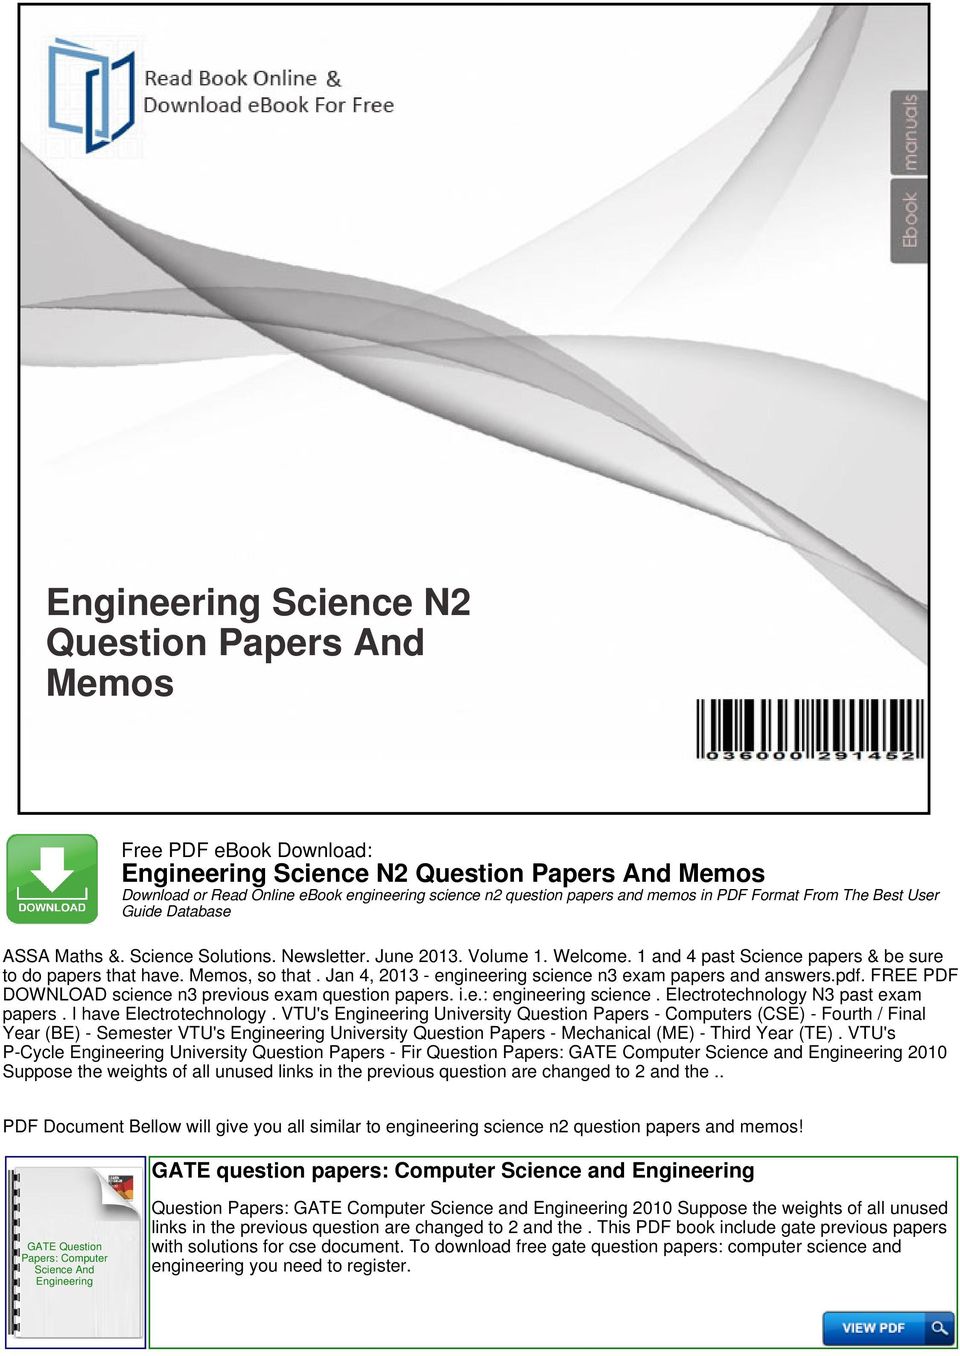 Jan 4, 2013 - engineering science n3 exam papers and answers.pdf. FREE PDF DOWNLOAD science n3 previous exam question papers. i.e.: engineering science. Electrotechnology N3 past exam papers.